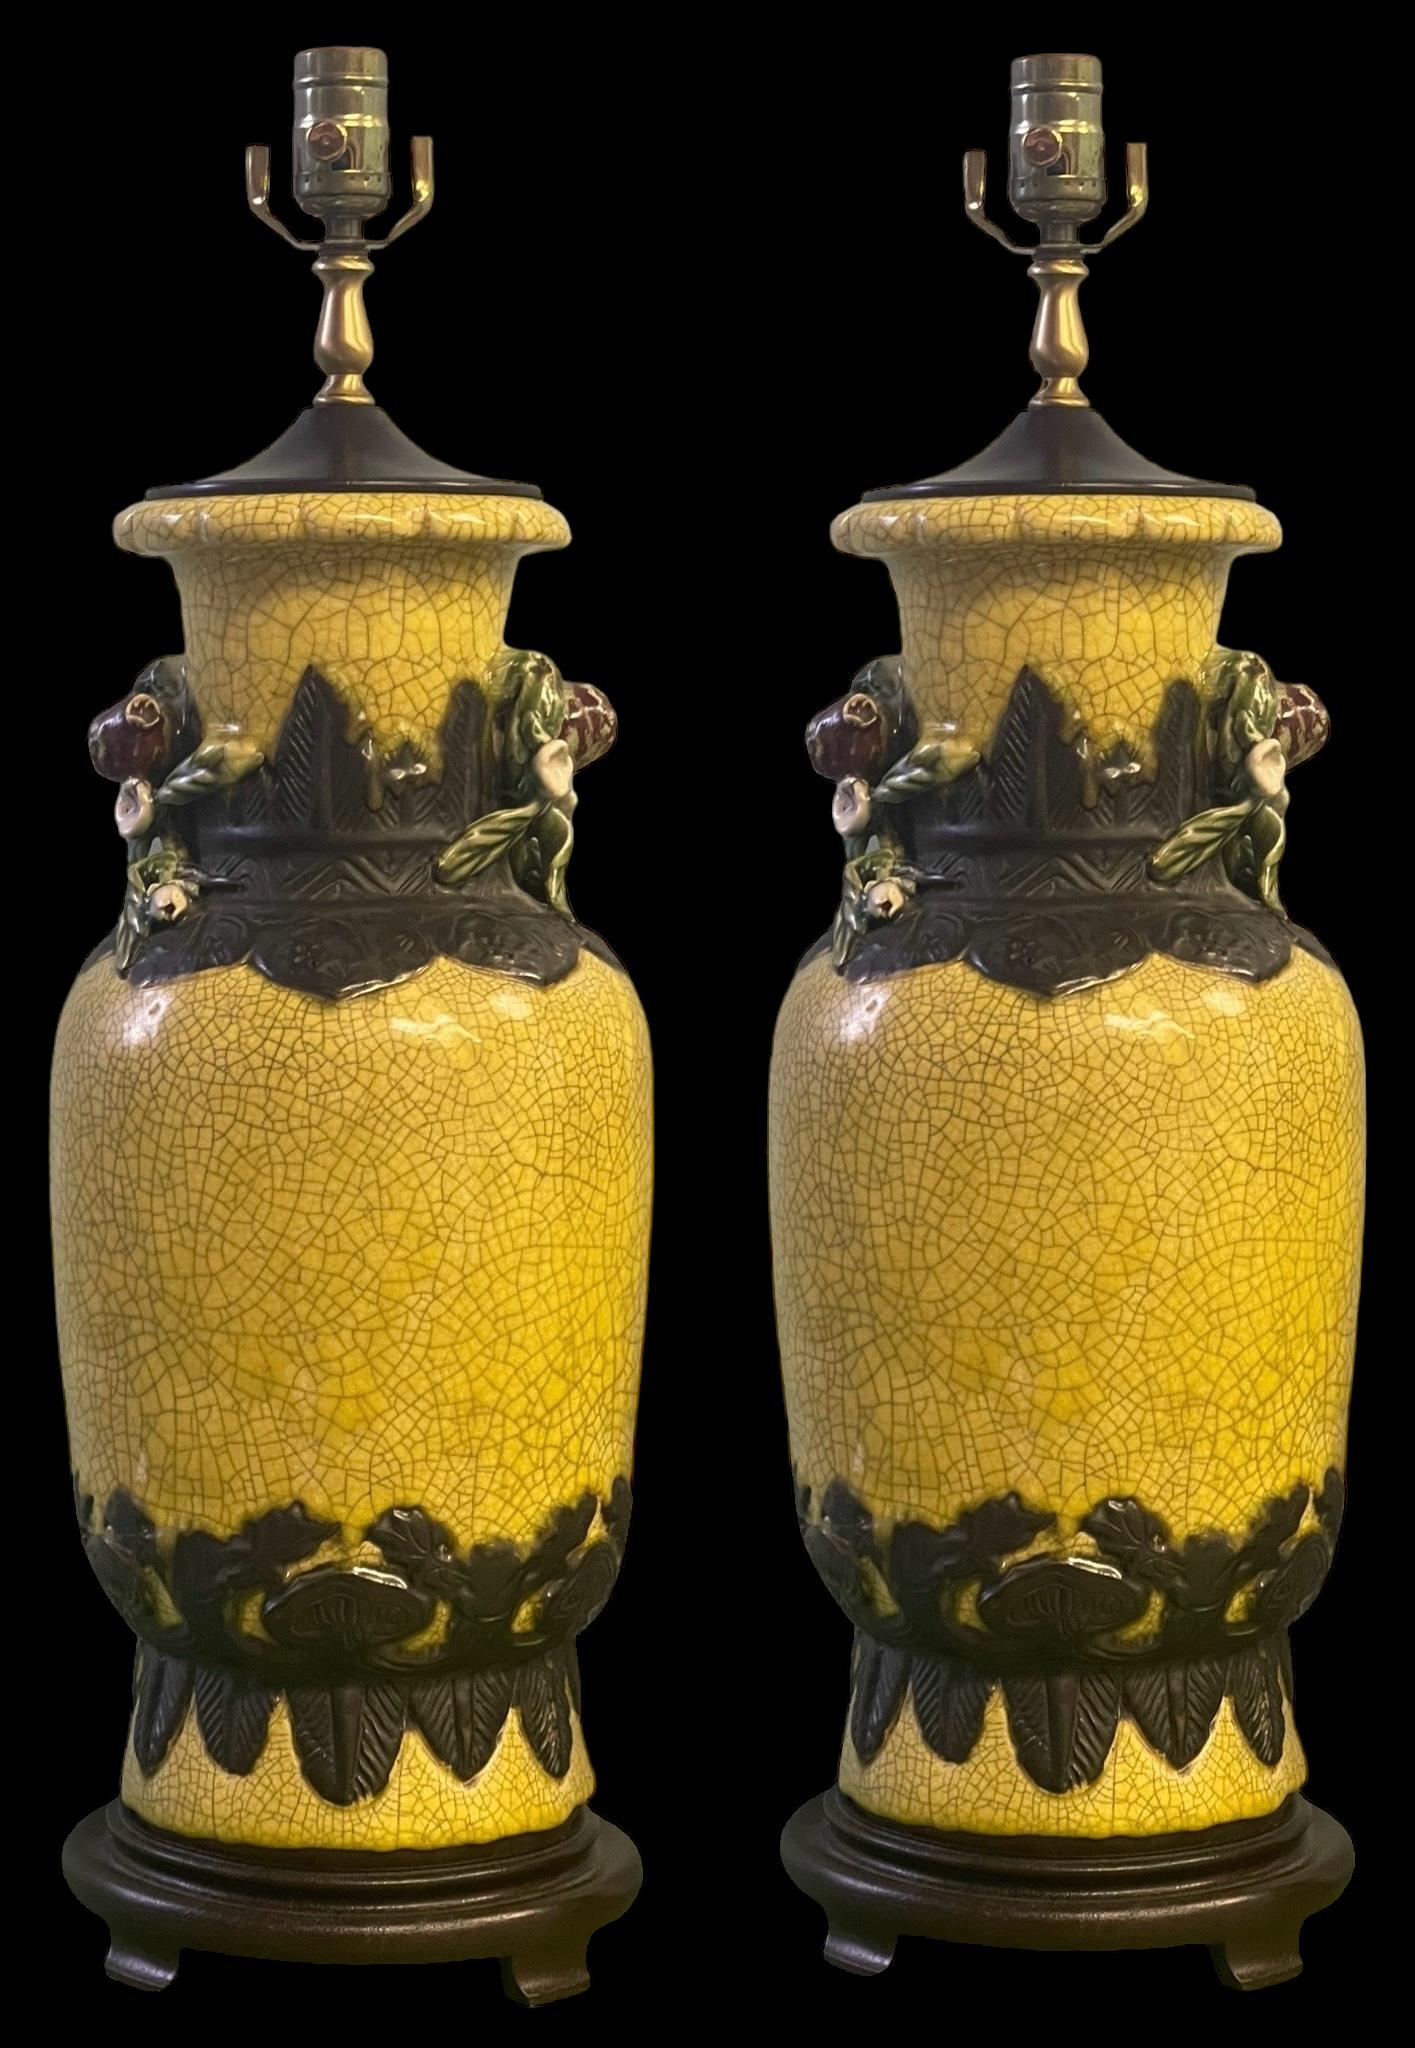 Chinese Export Style Jar / Vase Form Crackle Glaze Table Lamps W/ Fruit - Pair In Good Condition For Sale In Kennesaw, GA